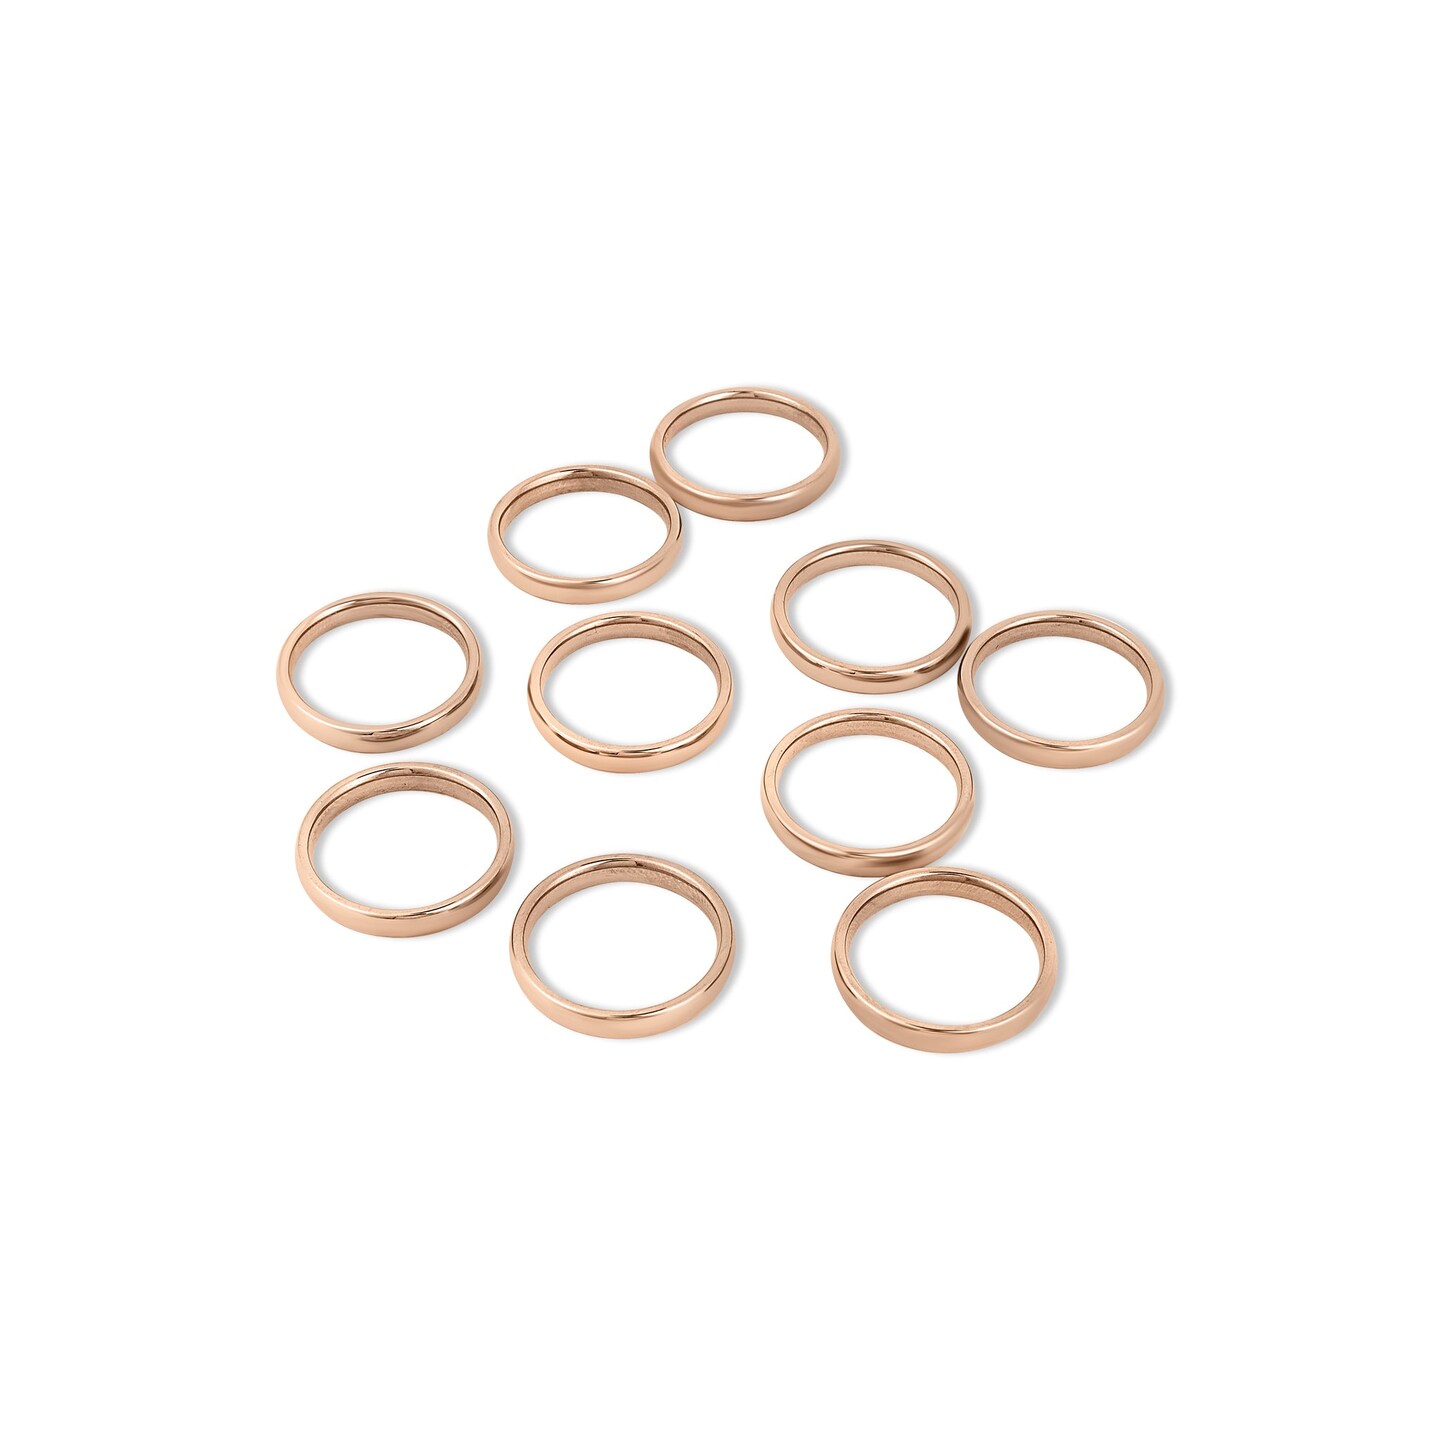 10 Pack - 3mm Size 6 Rose Gold Rounded Stainless Steel Blank Rings